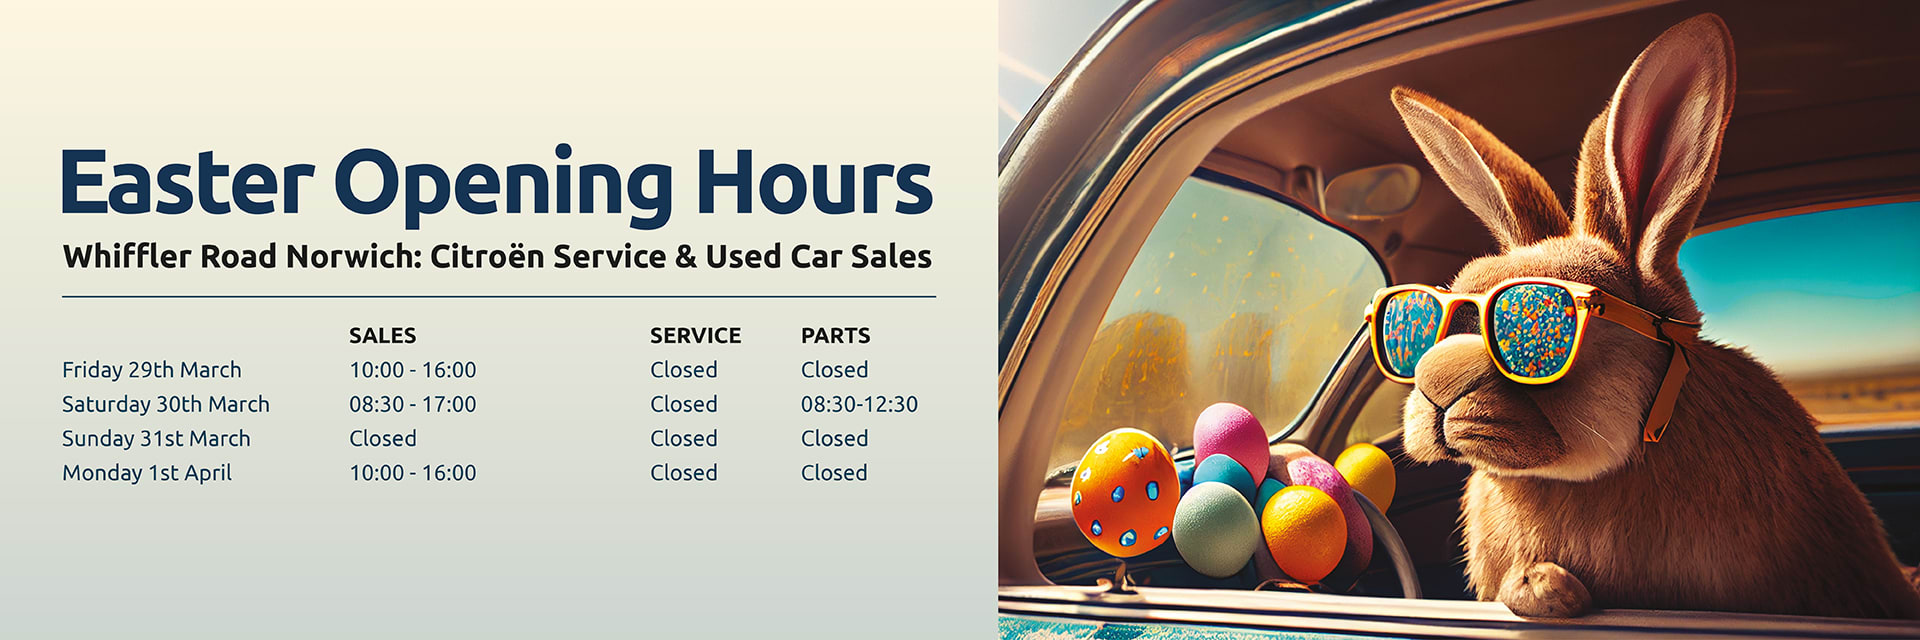 EASTER OPENING HOURS 